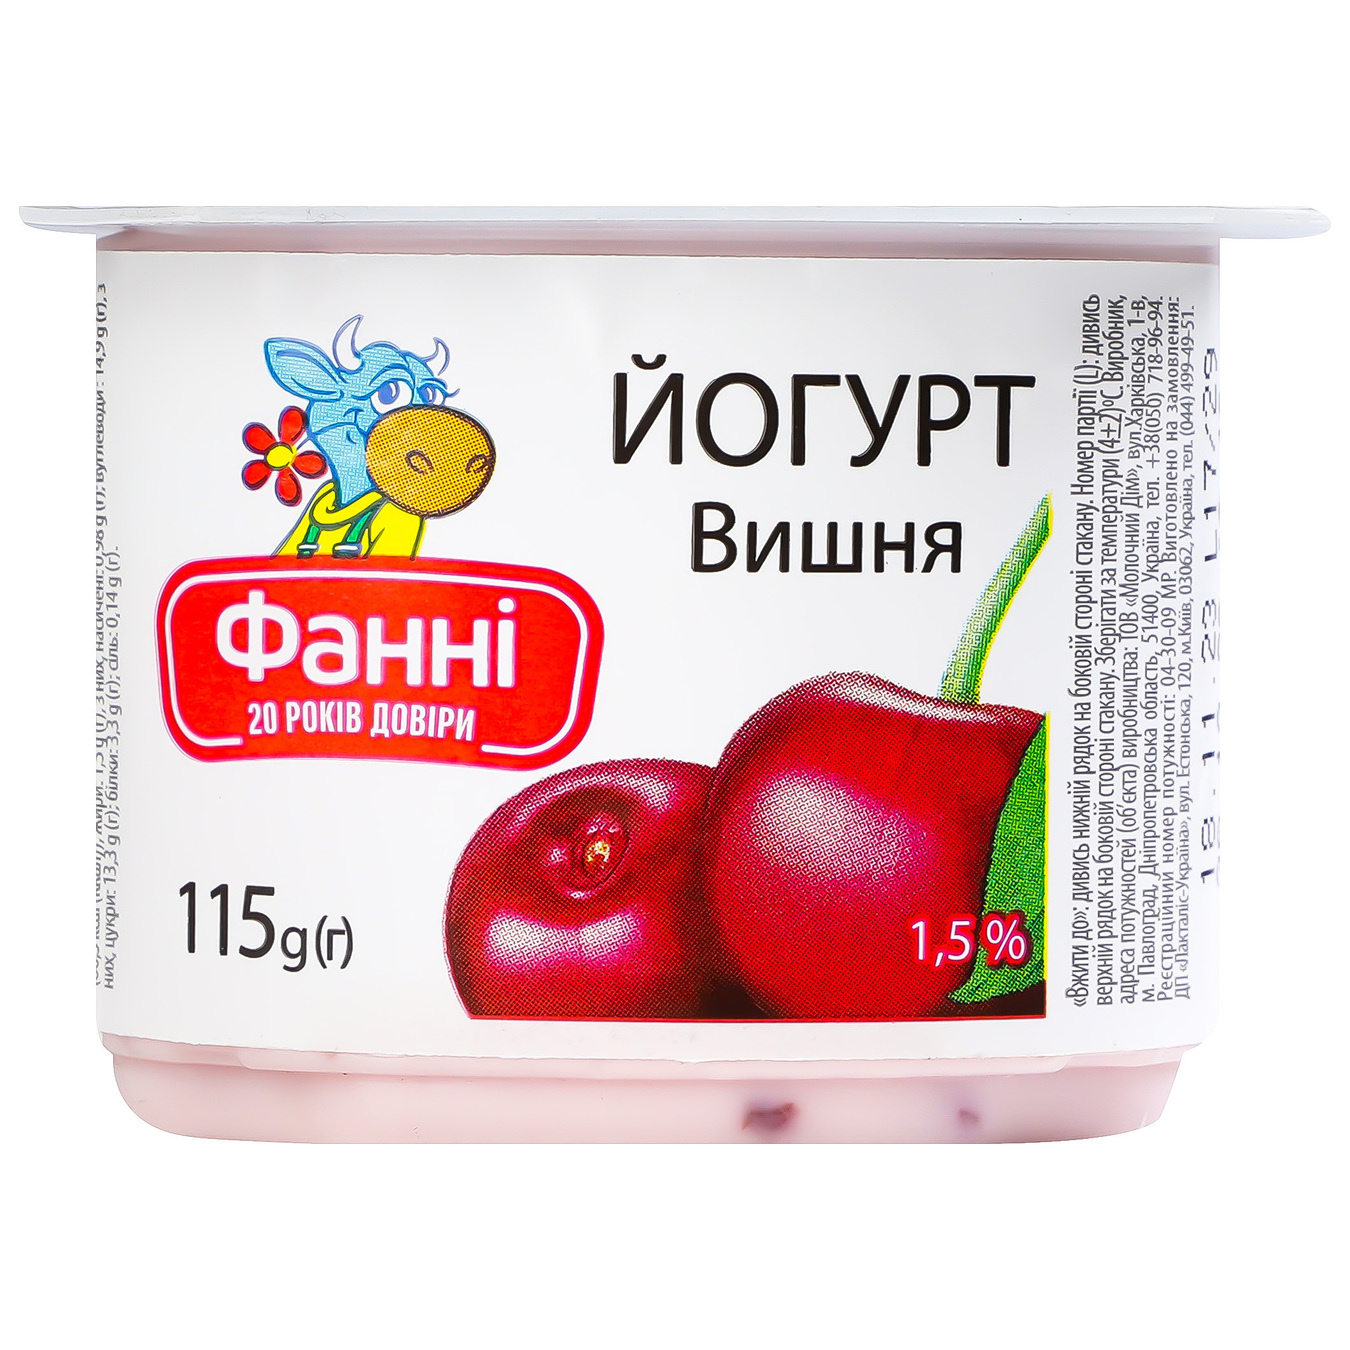 Fanny yogurt with cherry filling cup 1.5% 115g